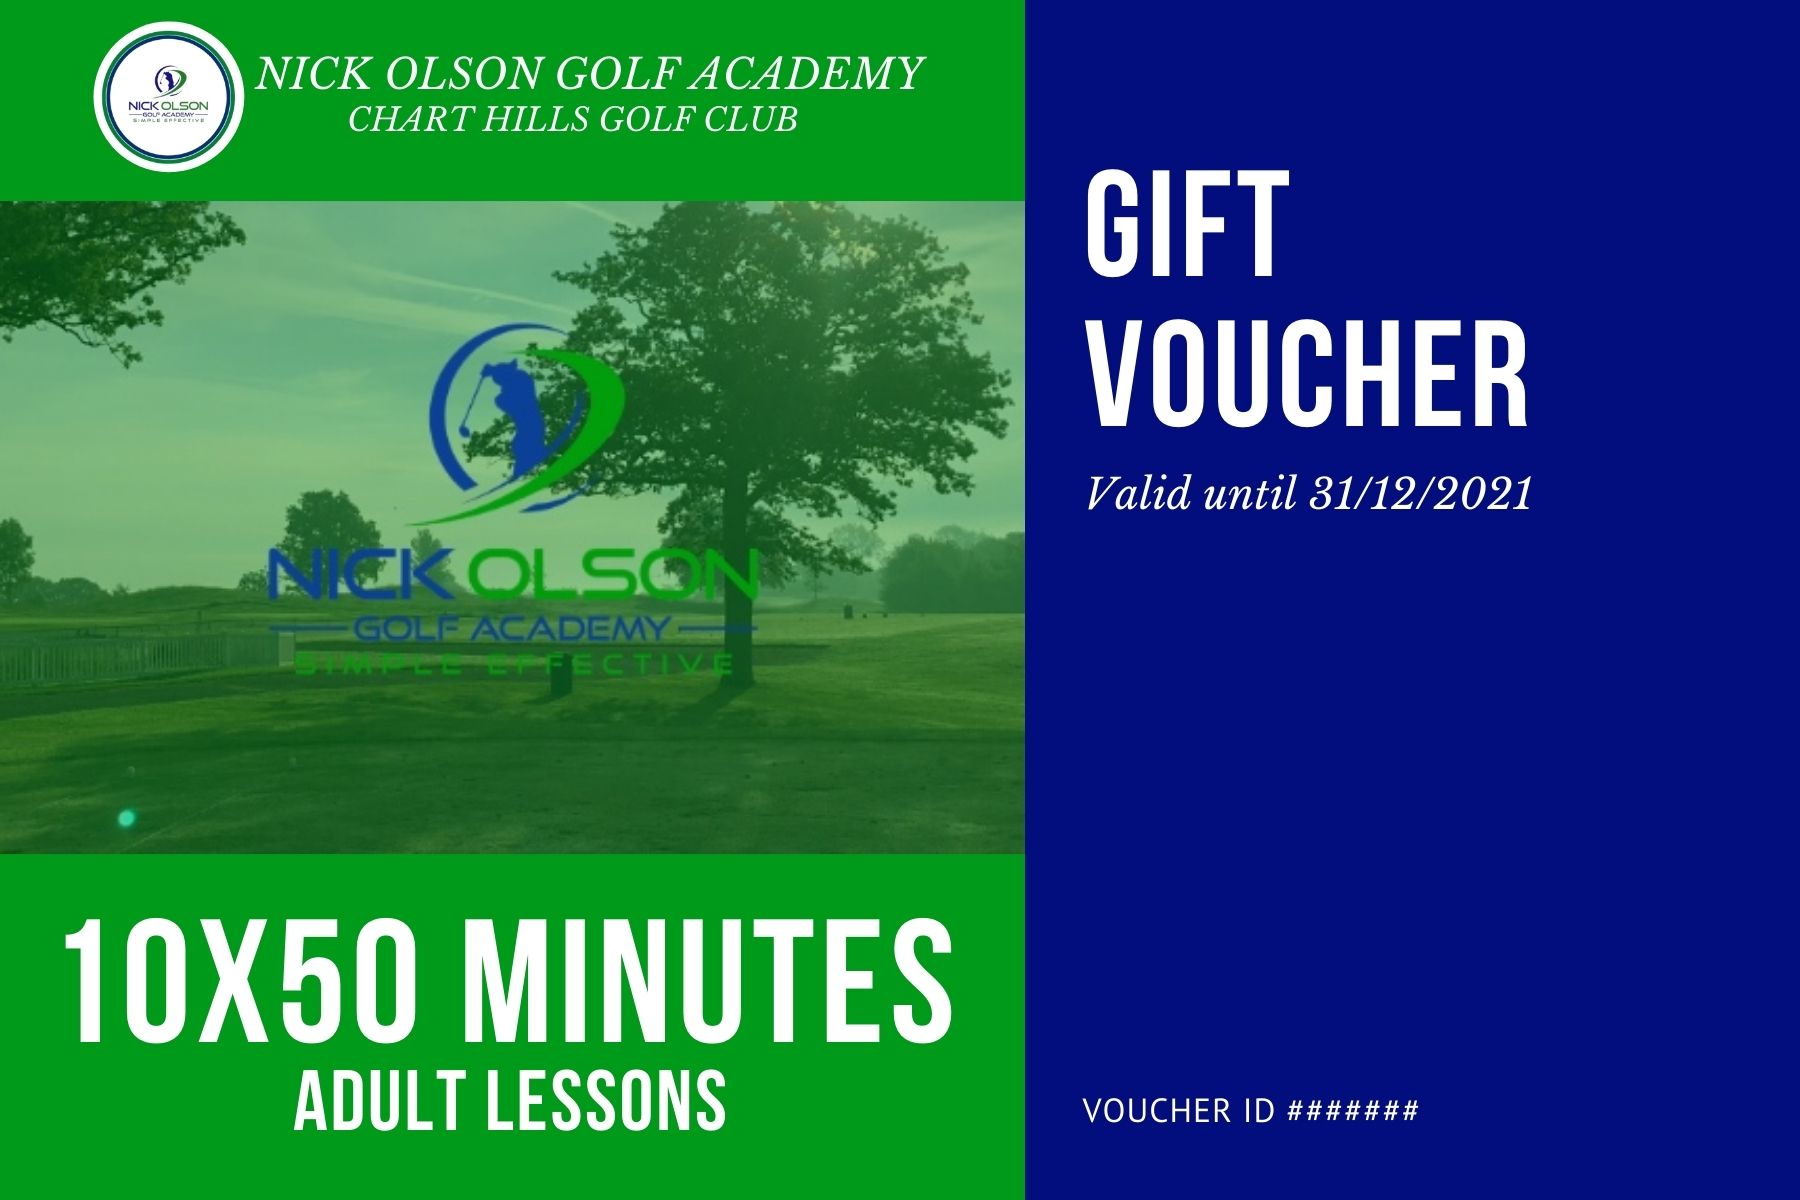 ADULT 10x50 MINUTE GOLF LESSONS